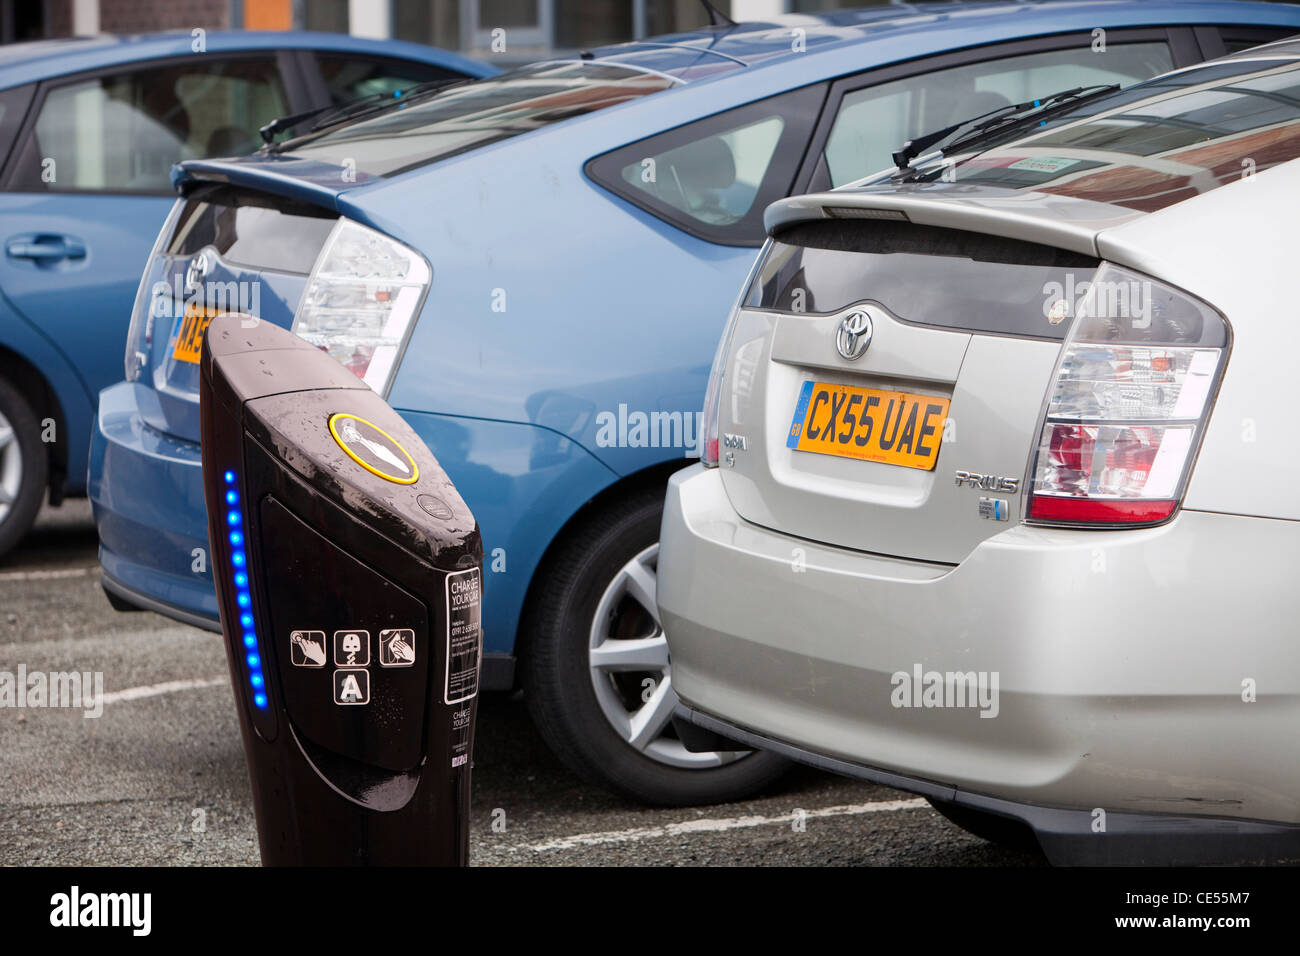 Prius hybrid cars and an electric car recharging station Stock Photo